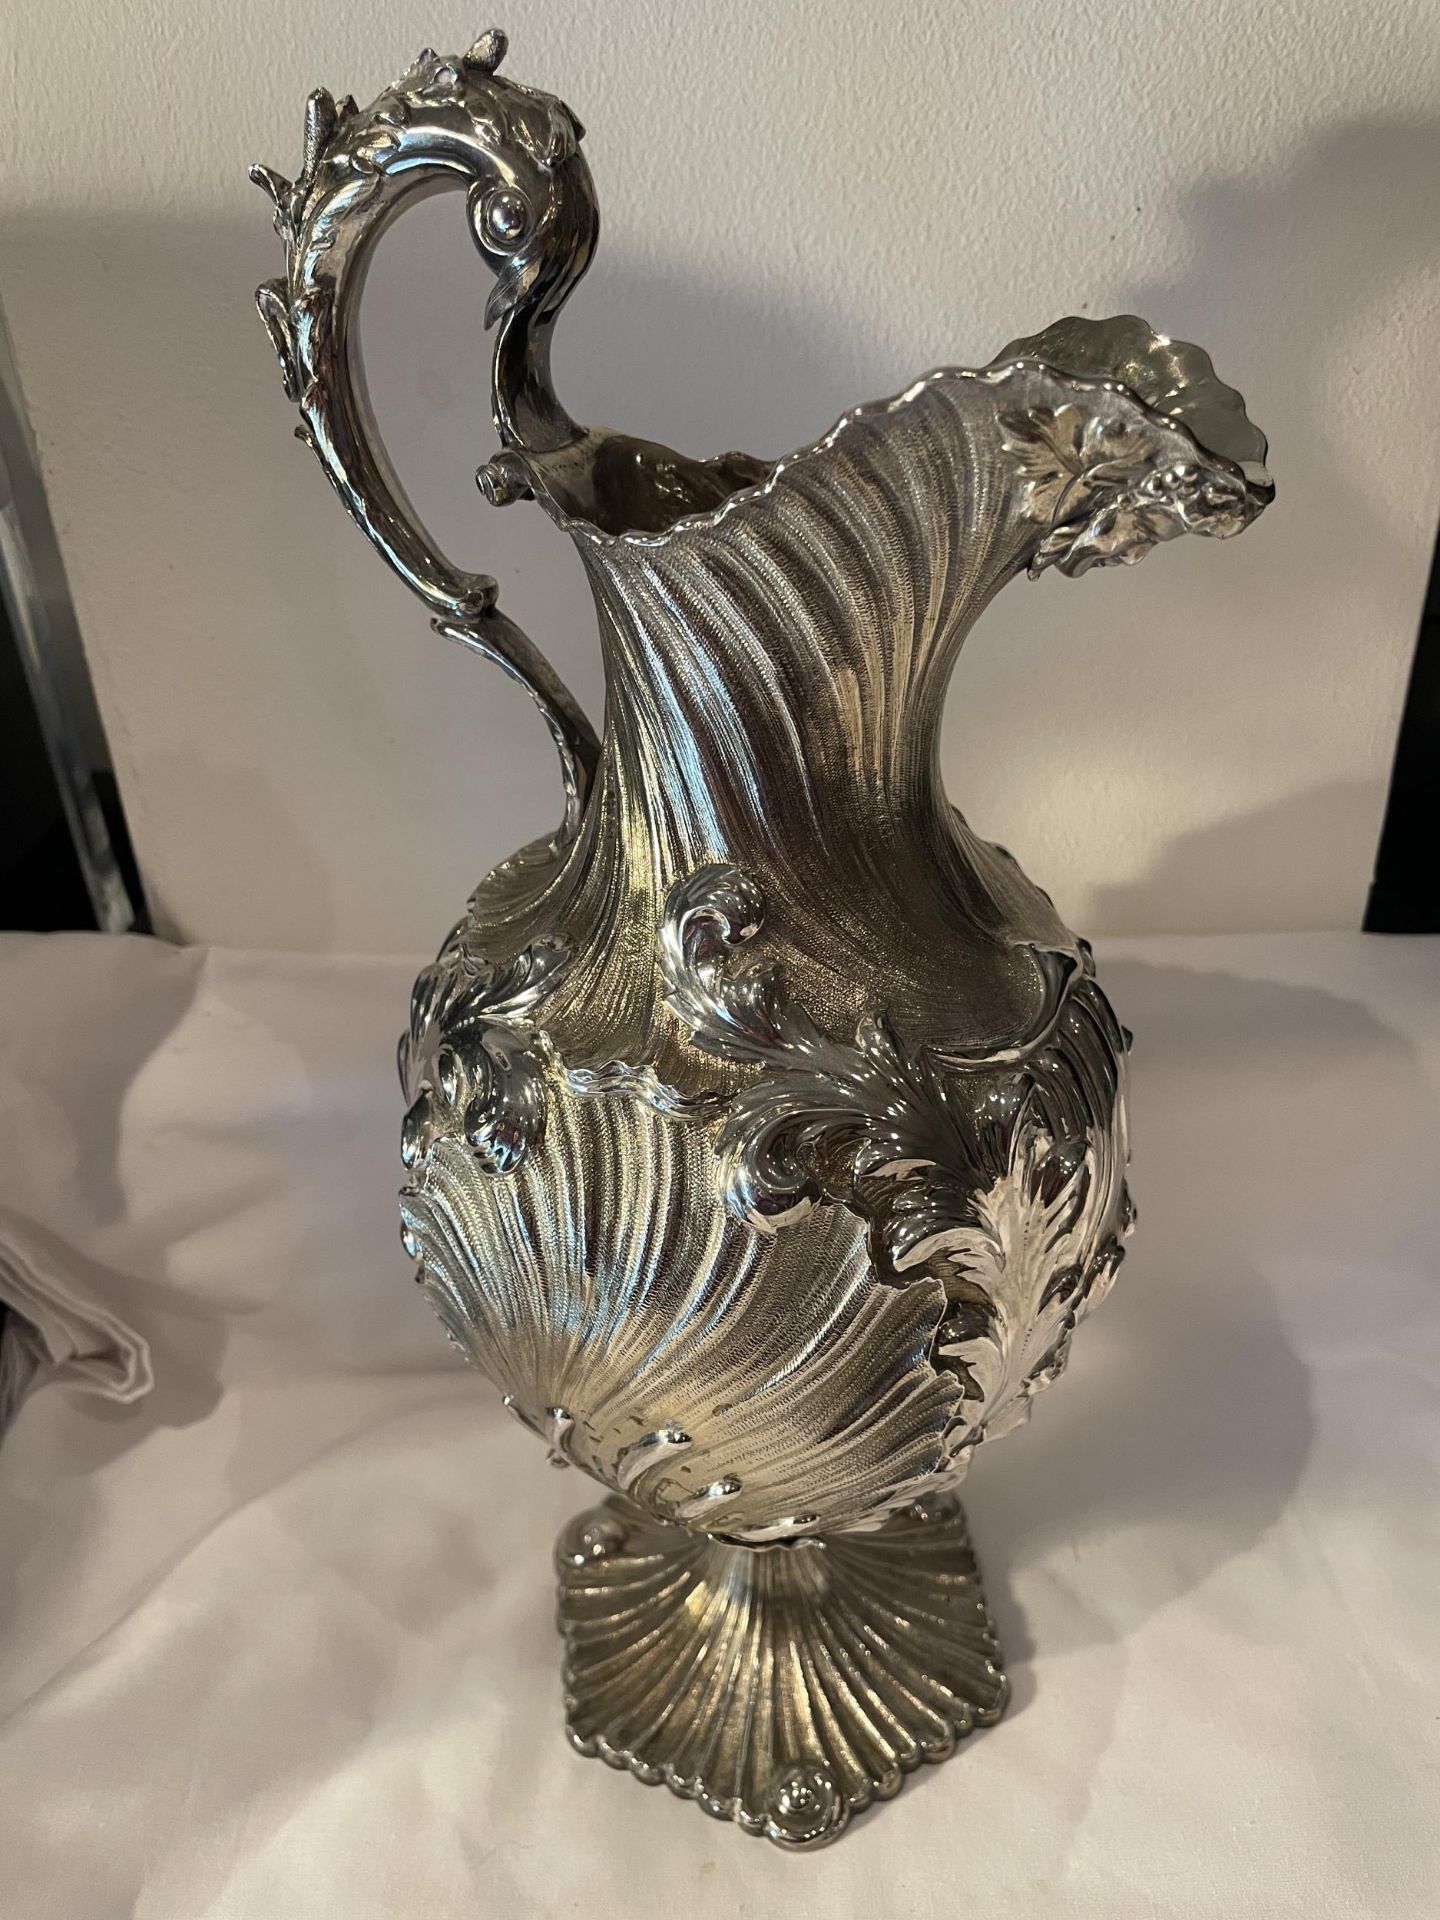 AN ORNATE 1830 HALLMARKED LONDON SILVER CLARET JUG, MAKER CHARLES FOX II GROSS WEIGHT 878 GRAMS - Image 13 of 18